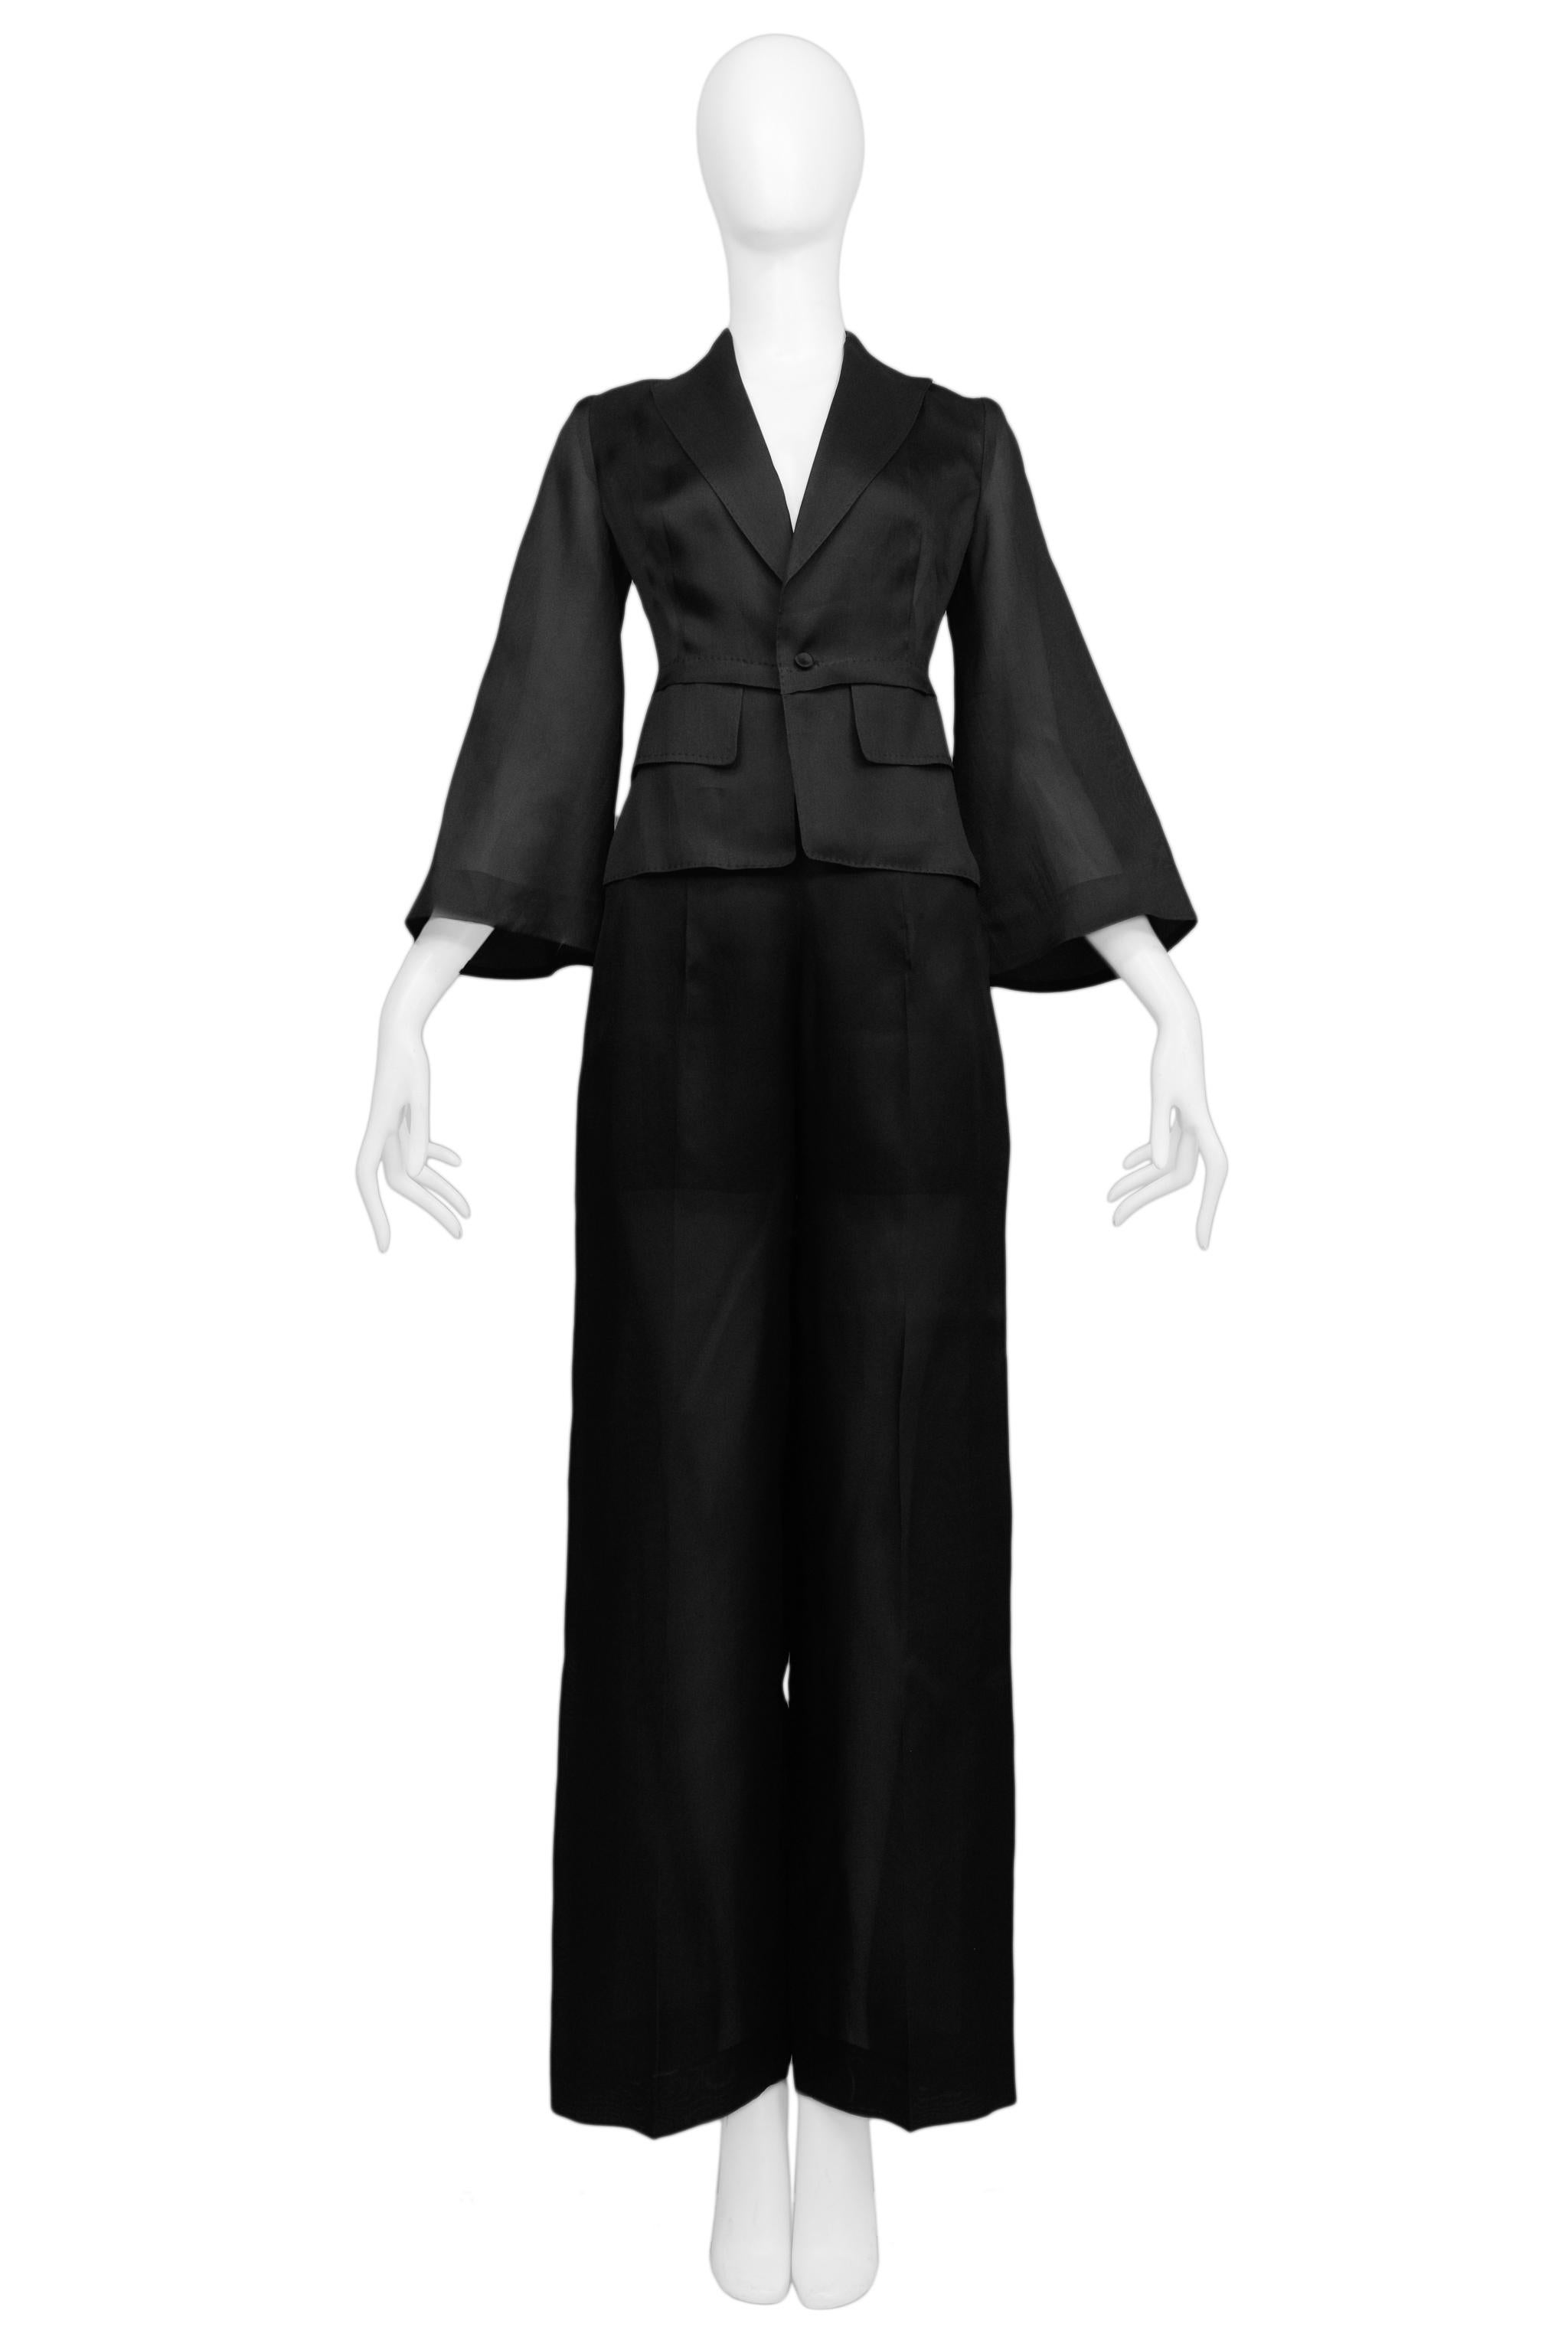 Resurrection Vintage is excited to offer a vintage Gianfranco Ferre sheer black pantsuit featuring a fitted jacket with a slightly high waistline, sharp lapels, 3/4 flared sleeves, one-button closure, and pocket flaps. The pants feature a paneled